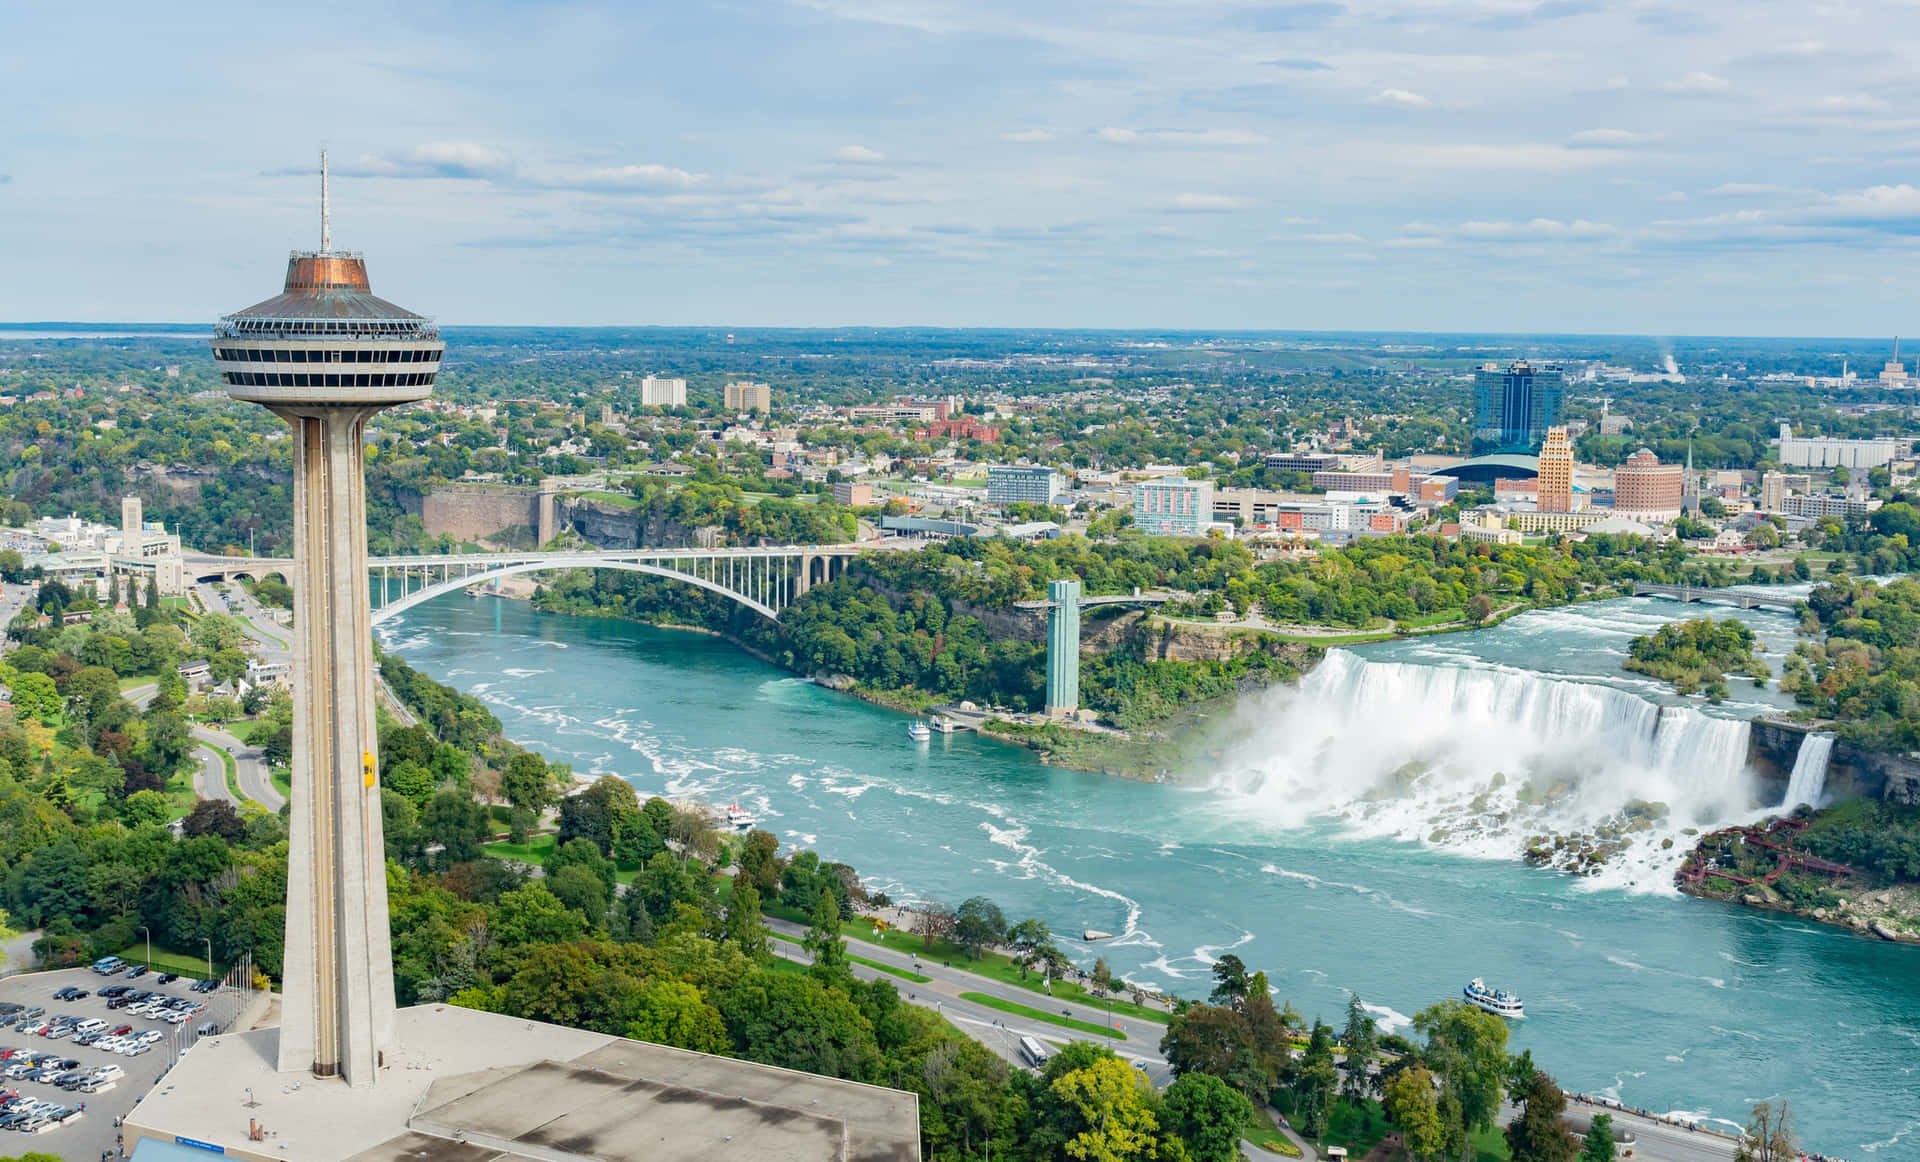 Niagara Falls – One of the Most Spectacular Wonders of the World